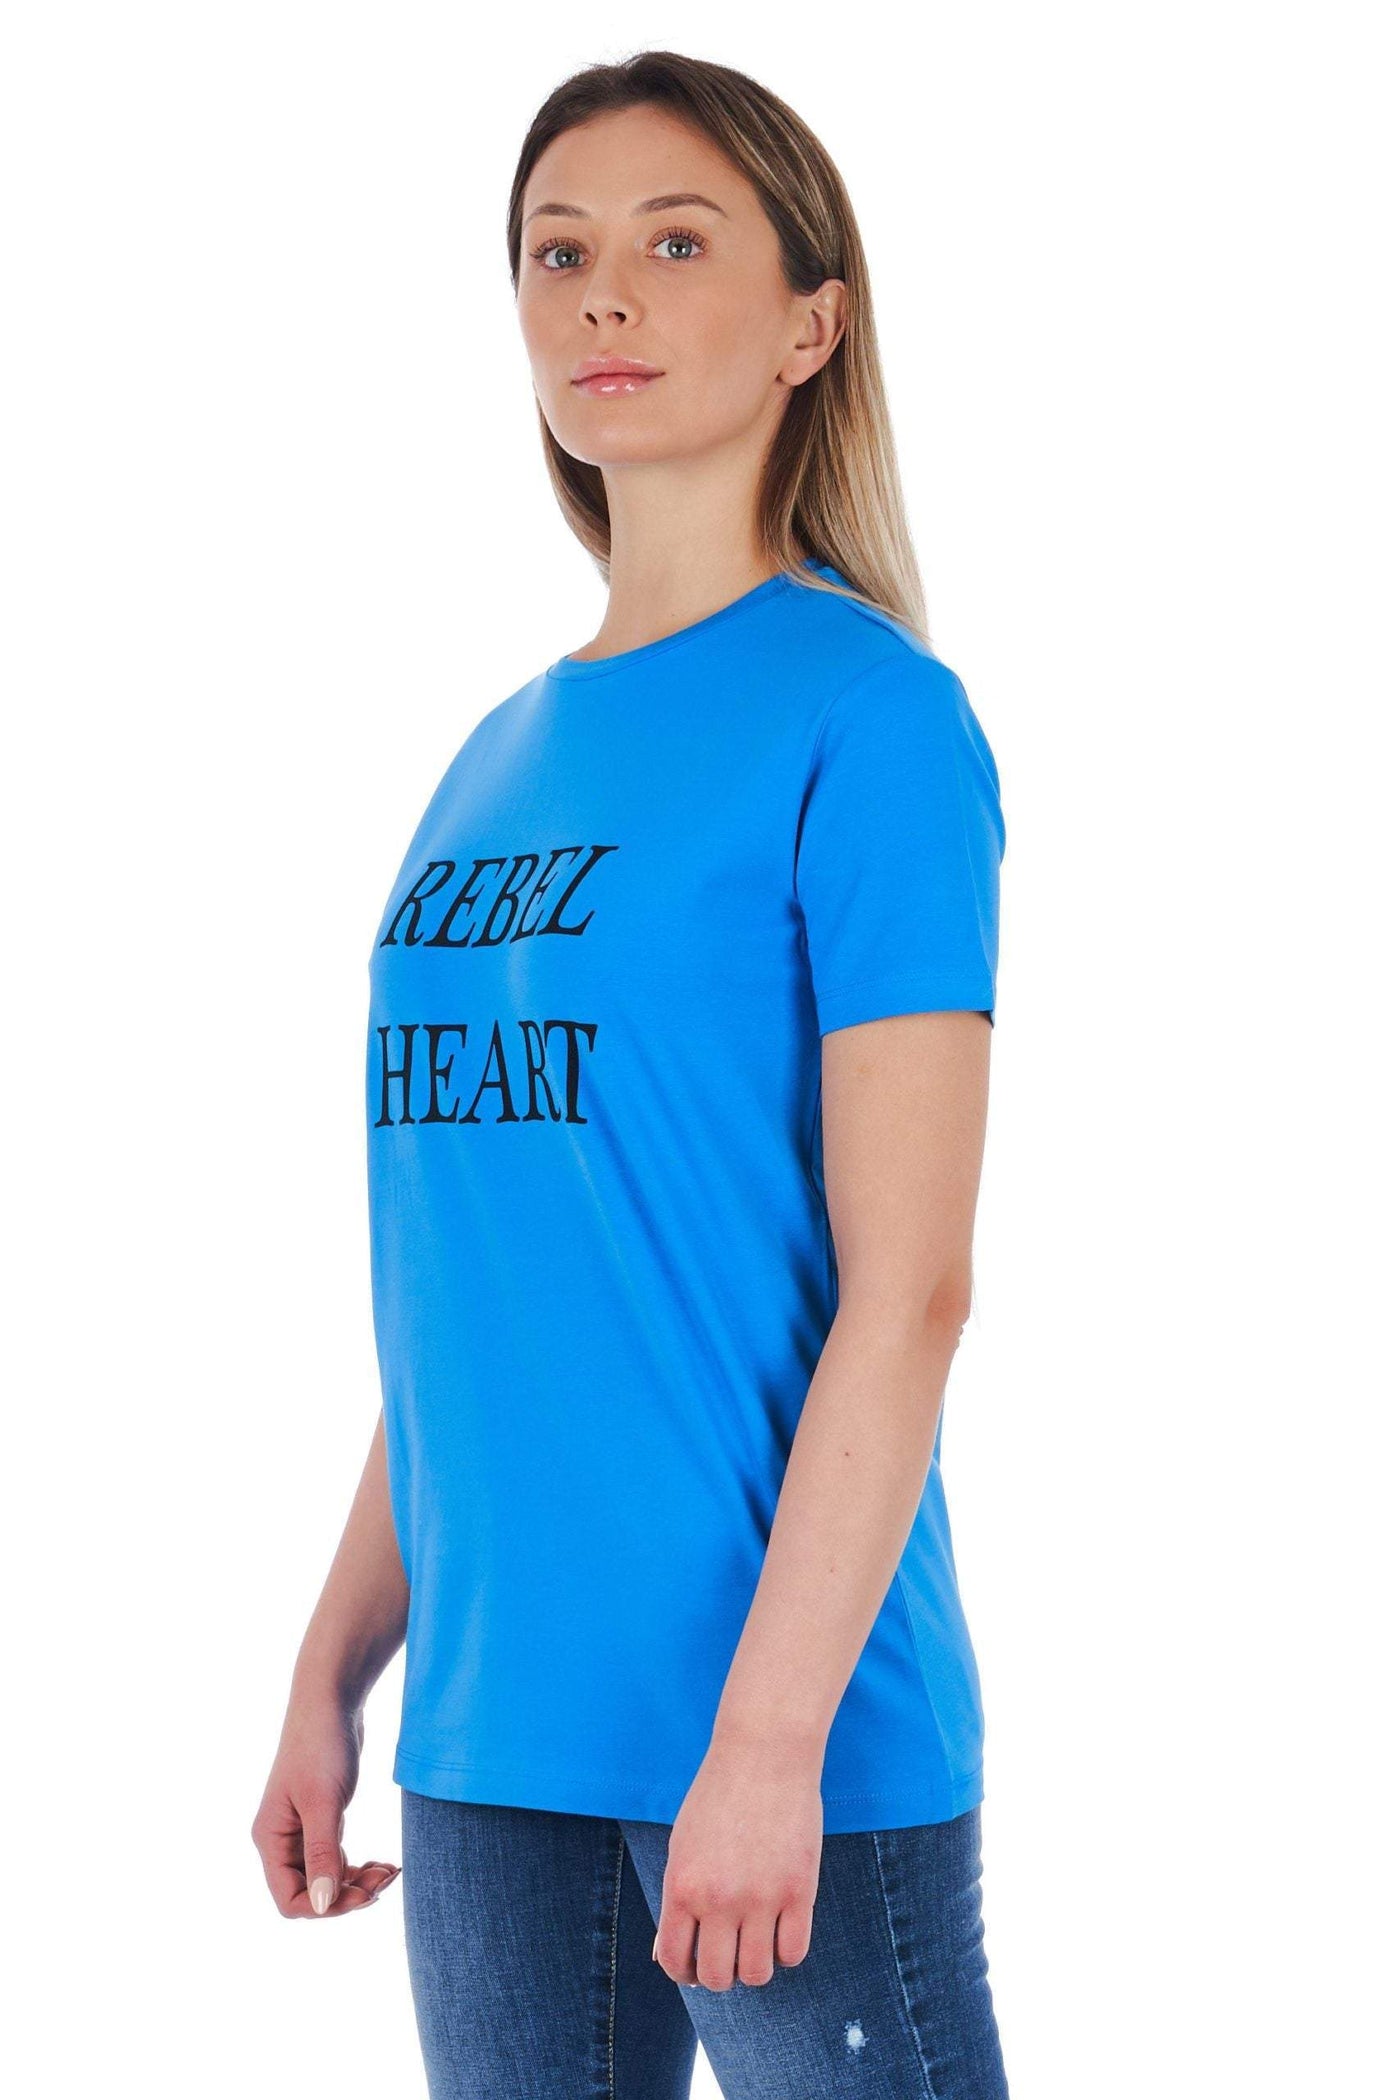 Frankie Morello printed Tops & T-Shirt #women, feed-agegroup-adult, feed-color-Blue, feed-gender-female, Frankie Morello, L, Light-blue, M, S, Tops & T-Shirts - Women - Clothing, XS at SEYMAYKA